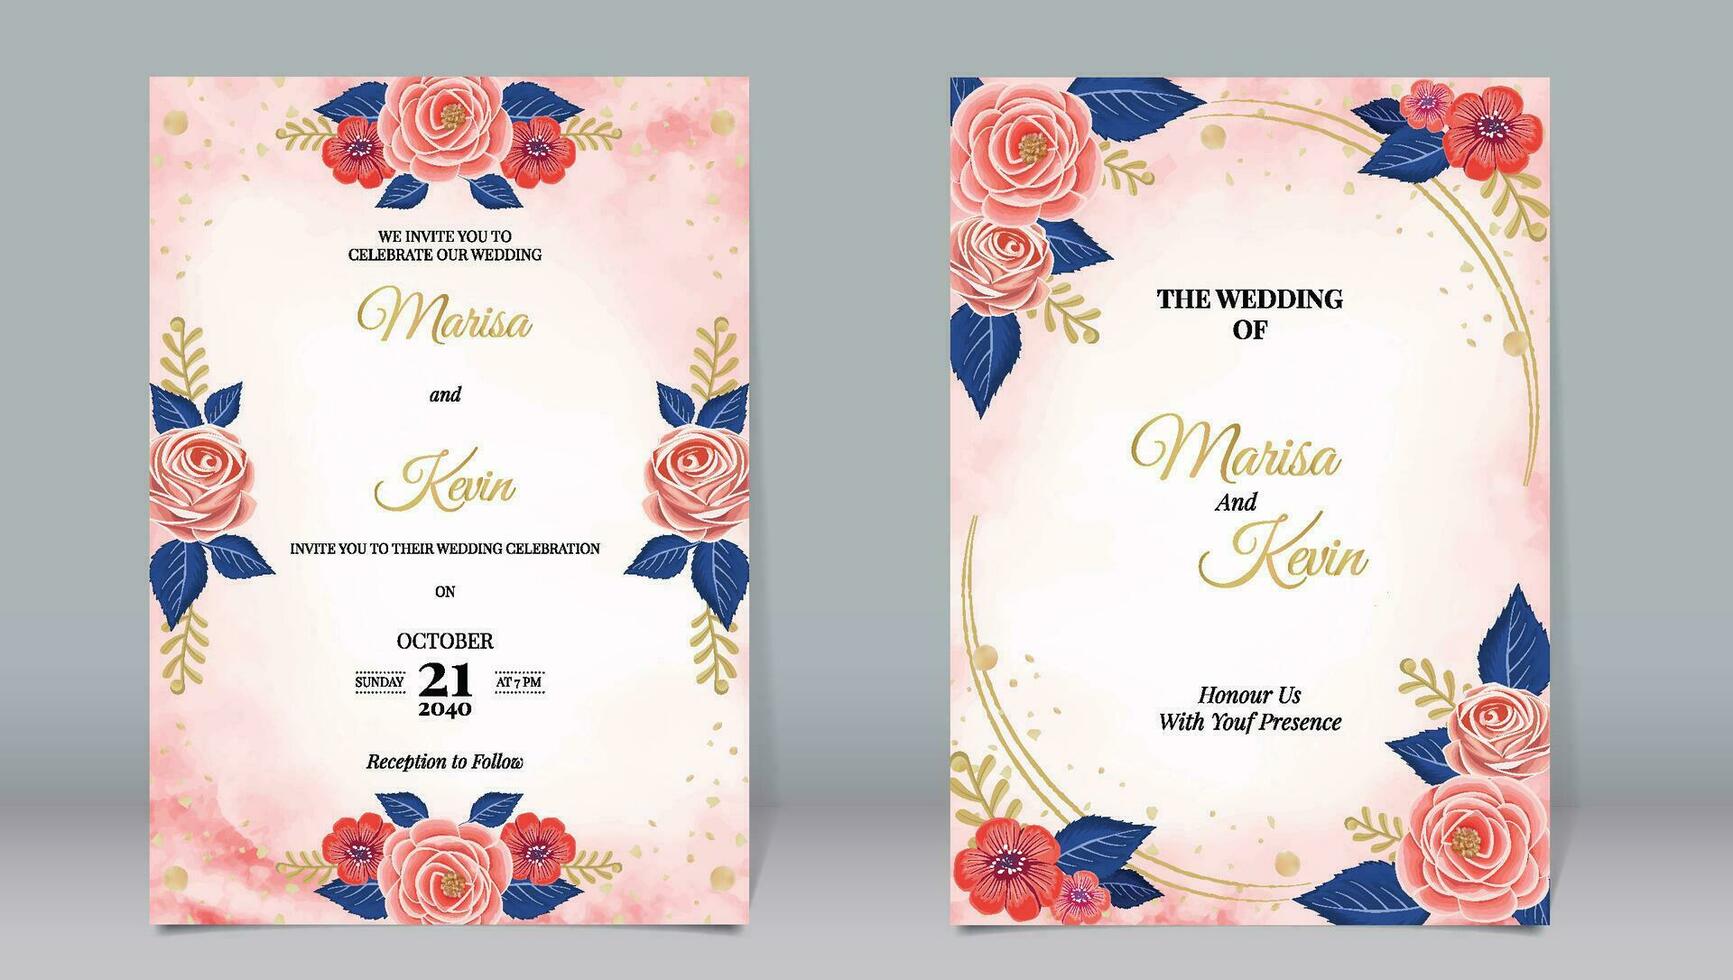 Wedding invitation of pink roses and blue leaves on a watercolor background vector